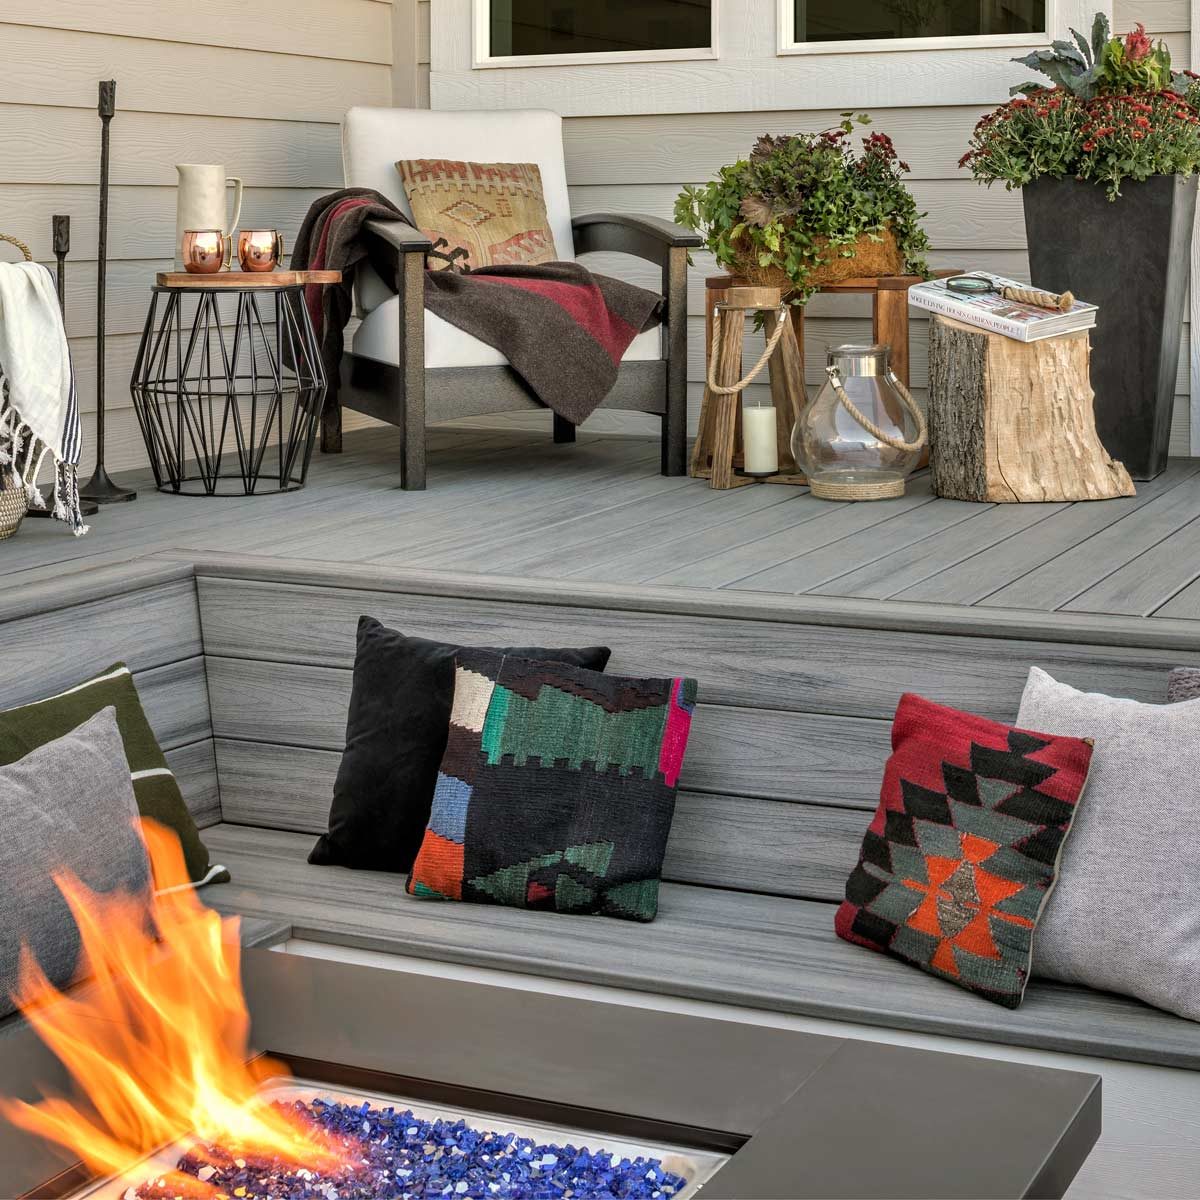 Trex Deck Ideas For Any Outdoor Space, Can You Use A Propane Fire Pit On Trex Deck